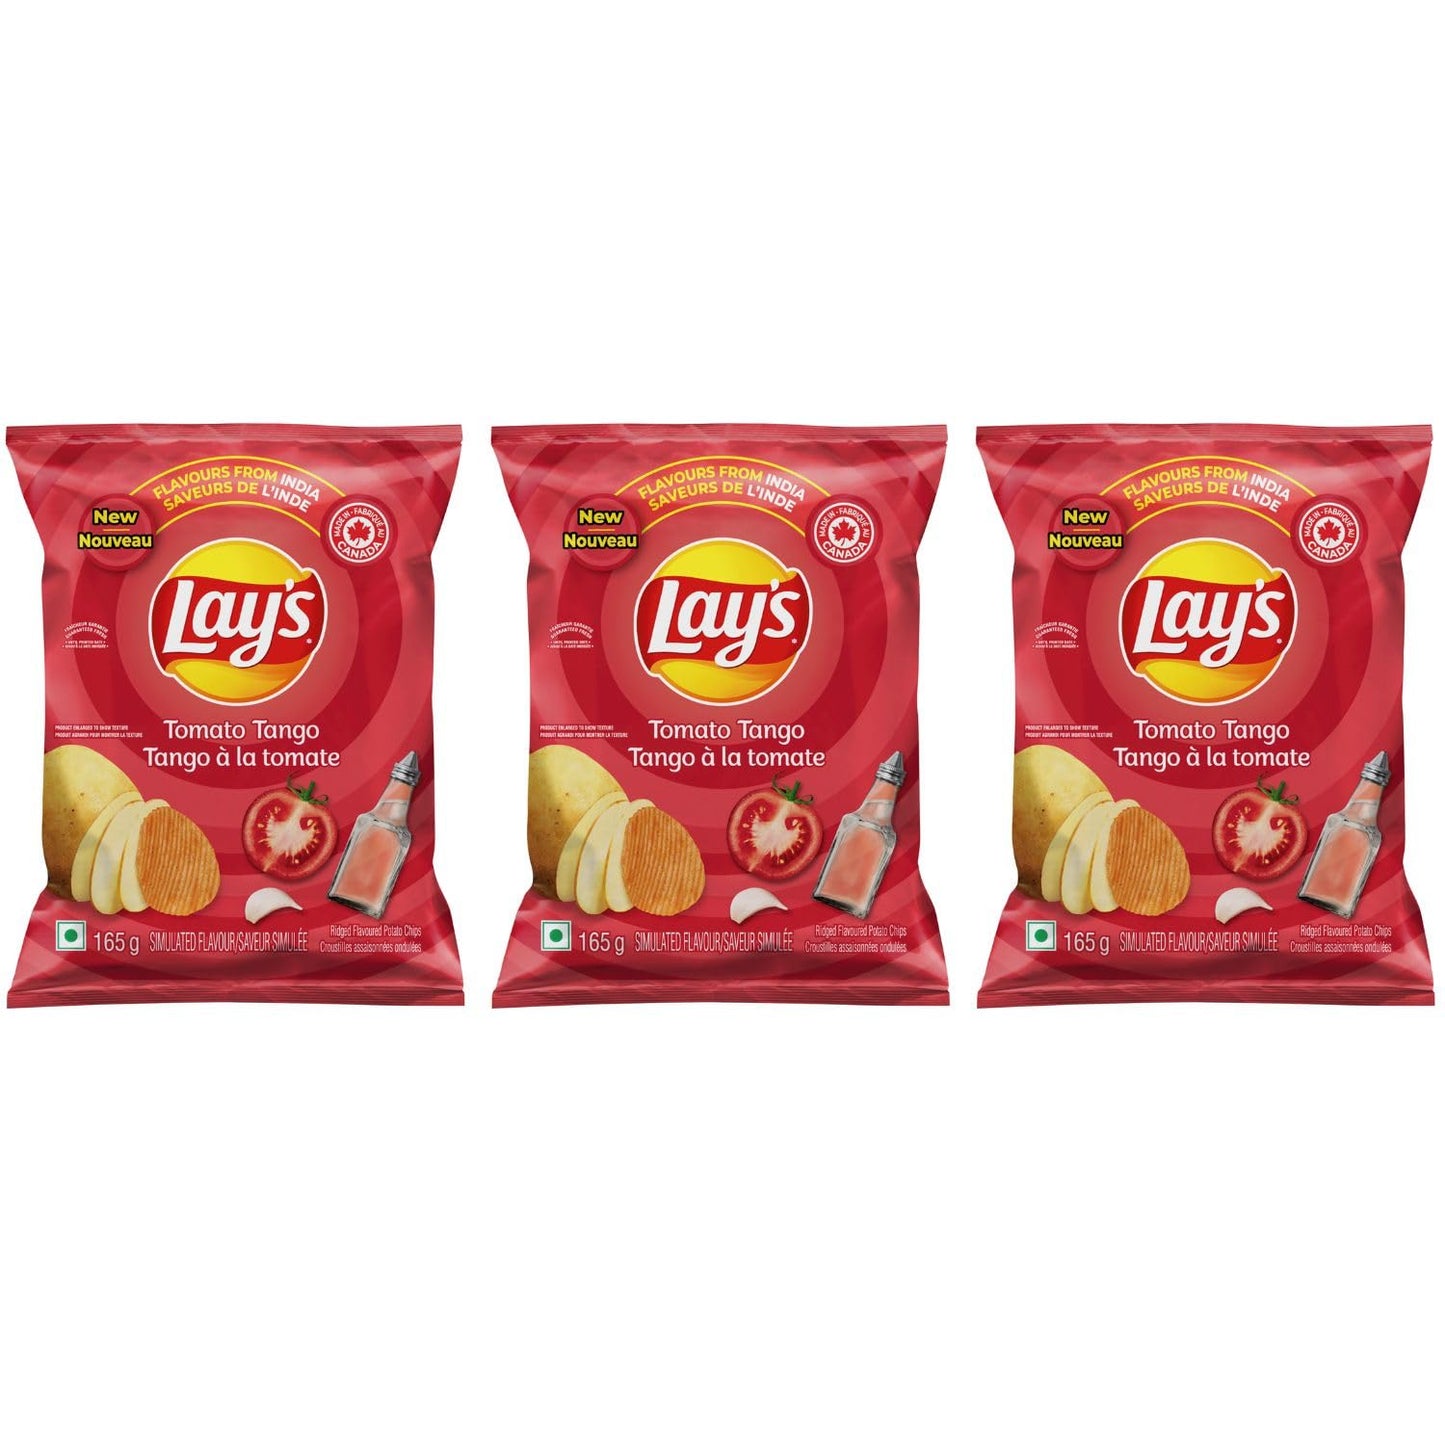 Lays Flavours from India Tomato Tango Ridged Potato Chips pack of 3